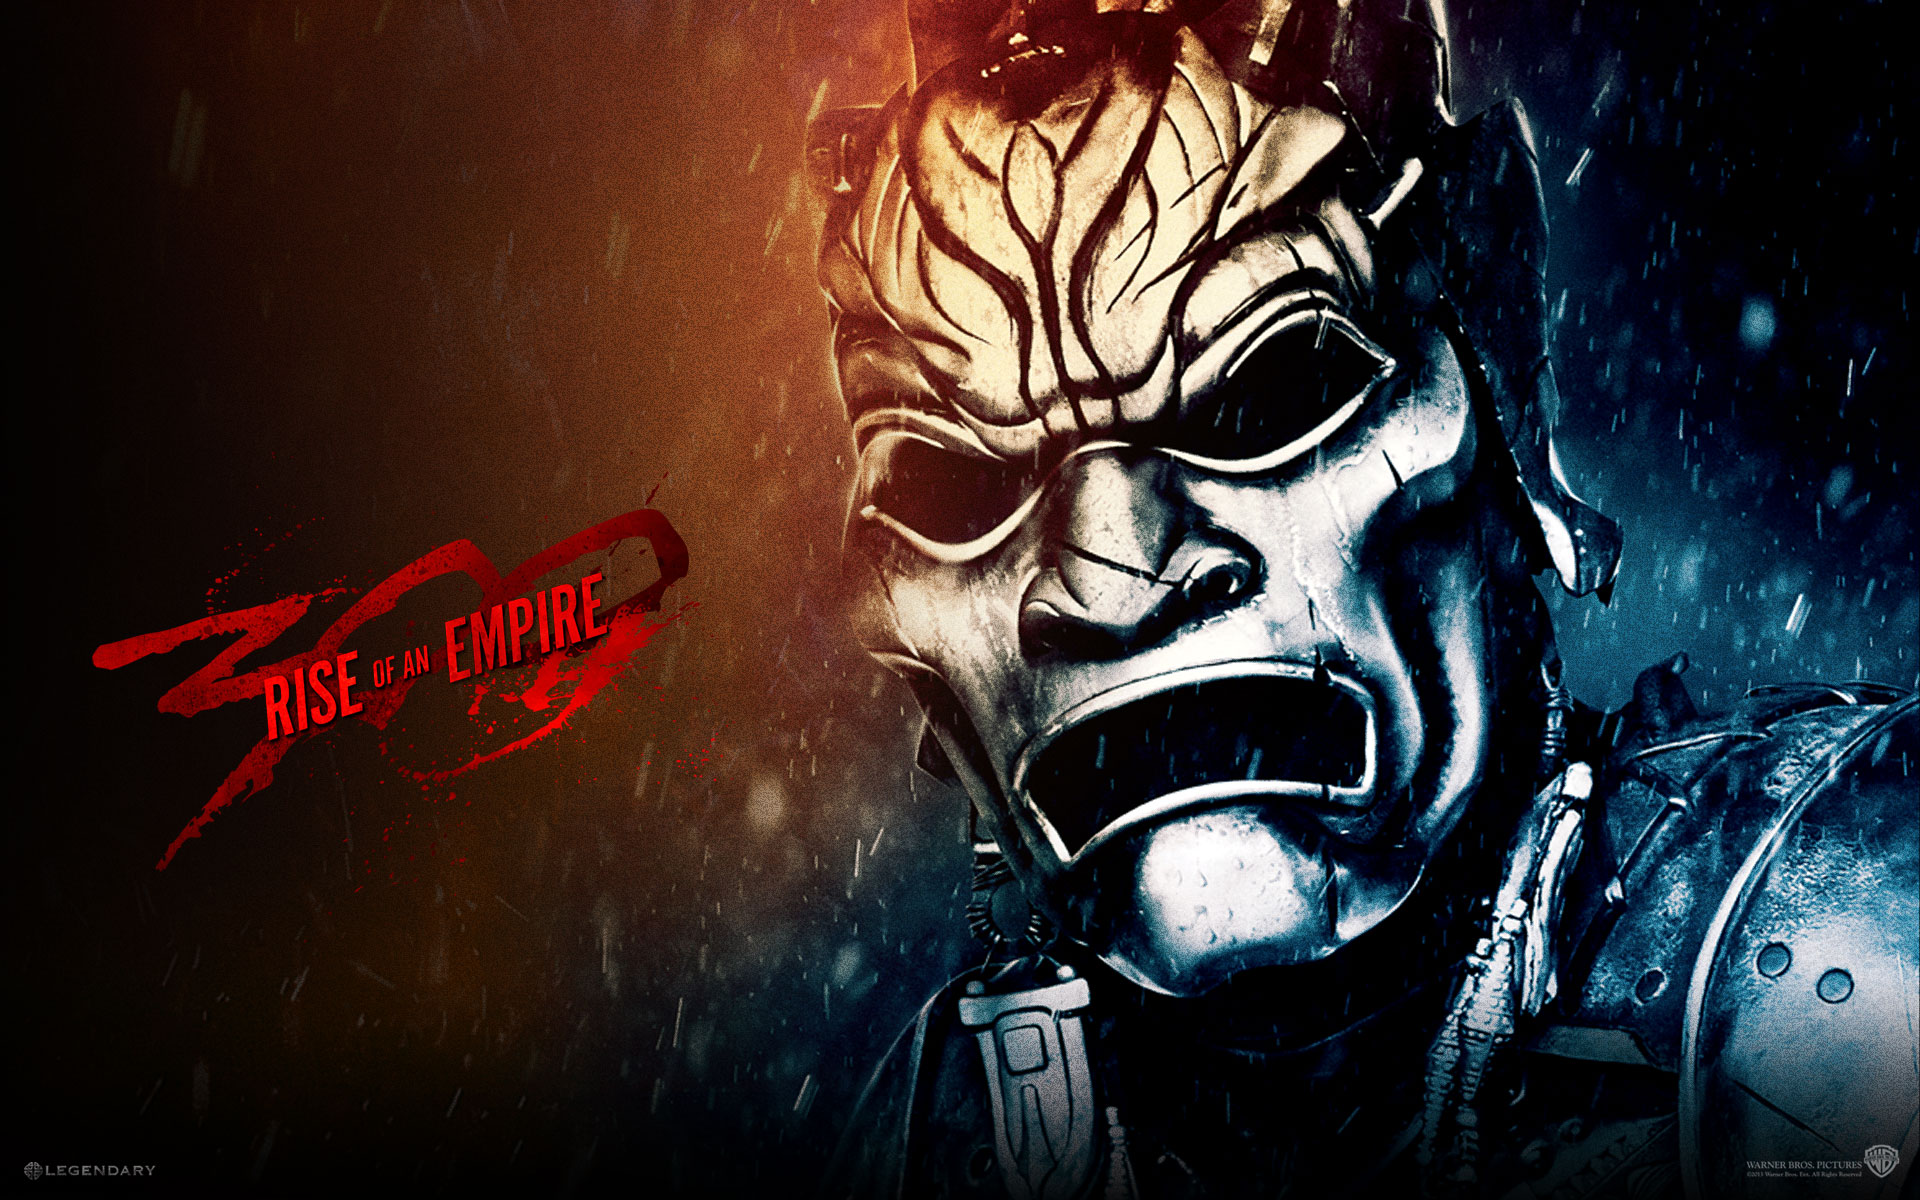 300: Rise of an Empire: free desktop wallpaper and background image